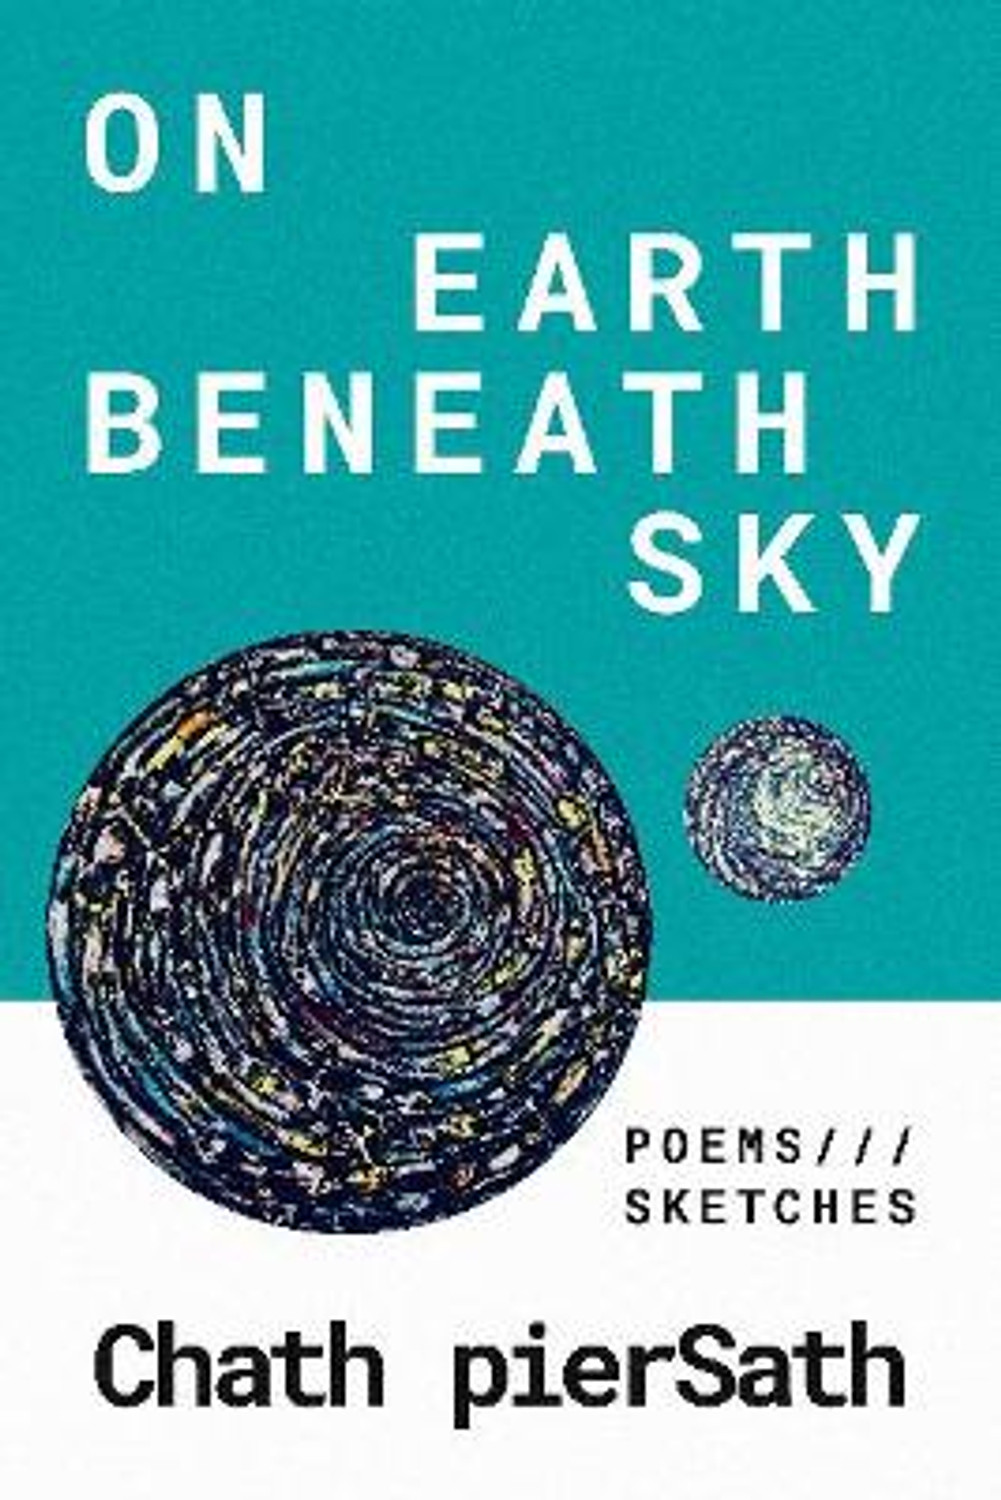 On Earth Beneath Sky: Poems and Sketches by Chath pierSath - Booksplease